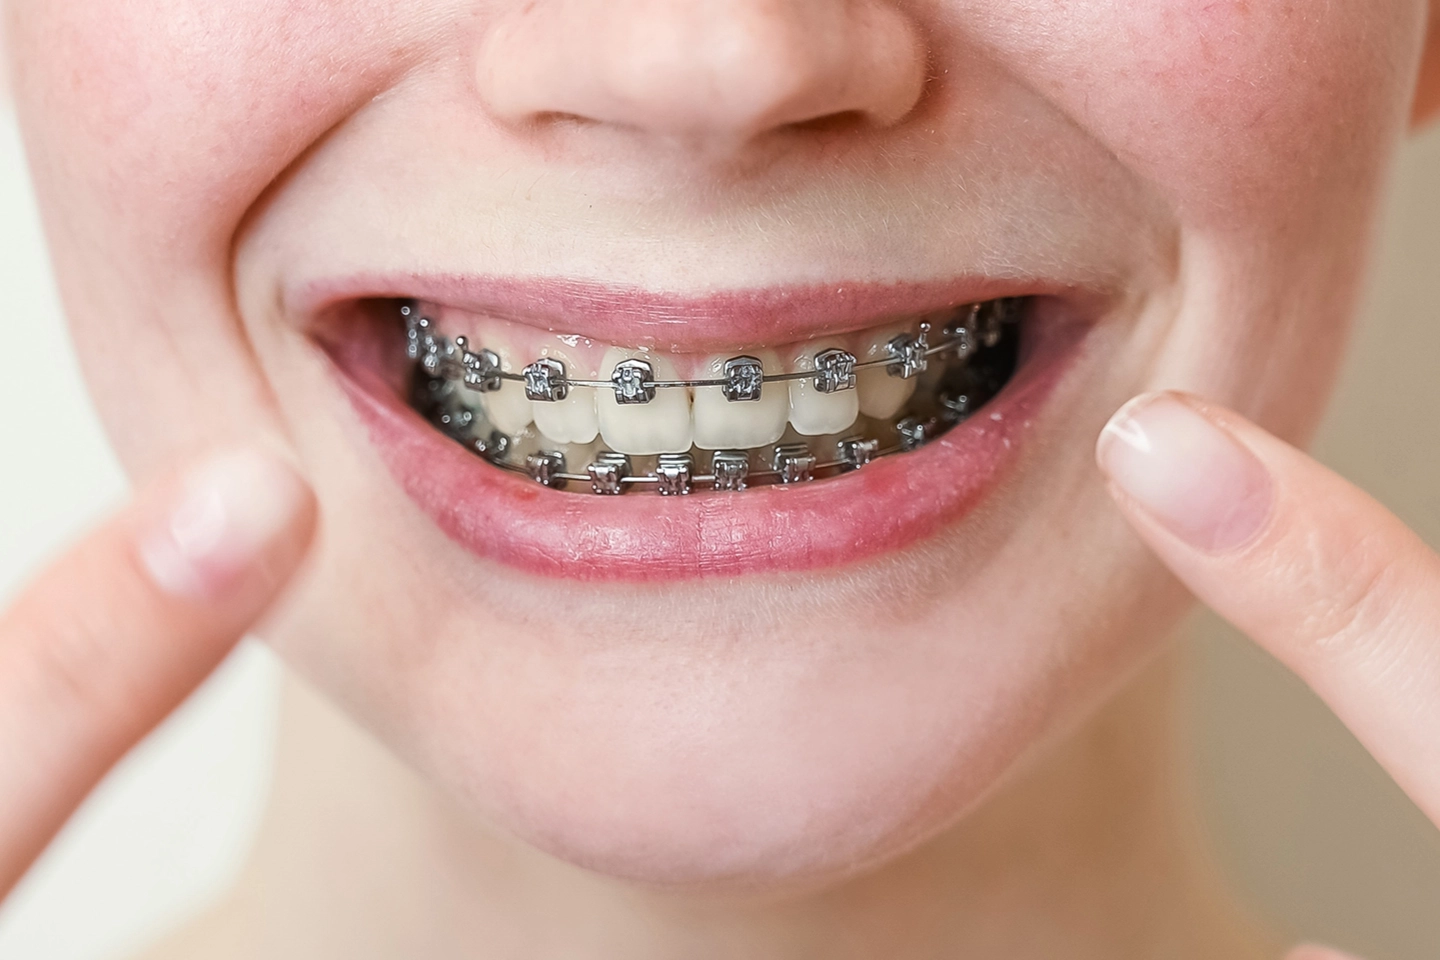 Dental Braces: Indications, Complications And Restrictions